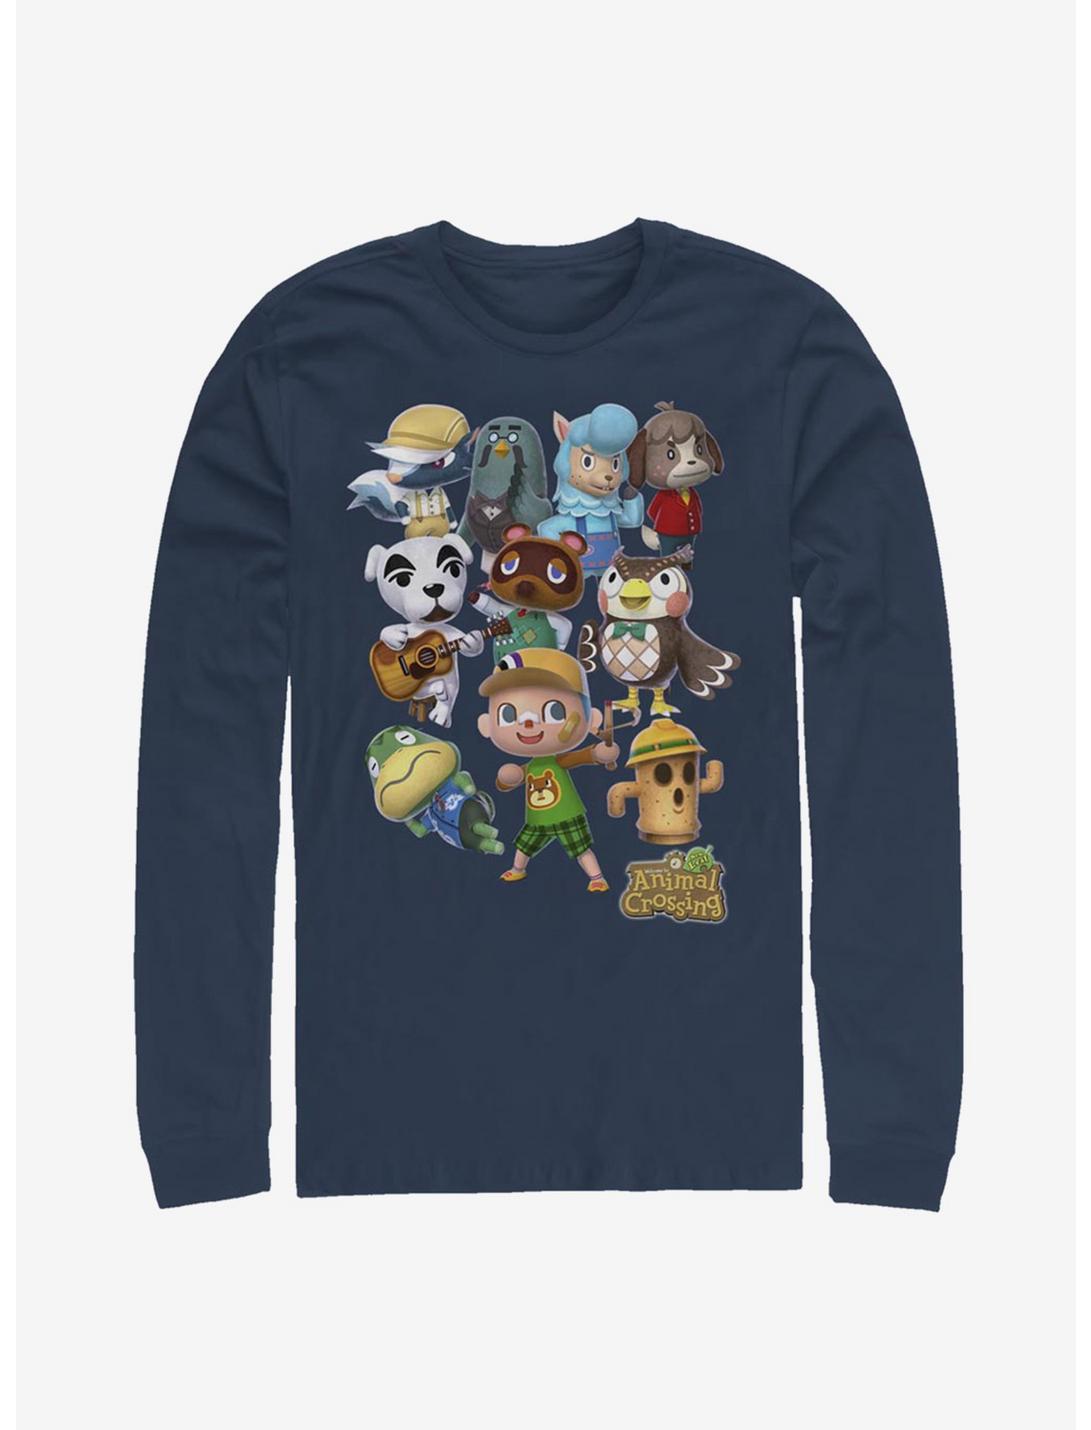 Animal Crossing Welcome Back Long-Sleeve T-Shirt, NAVY, hi-res